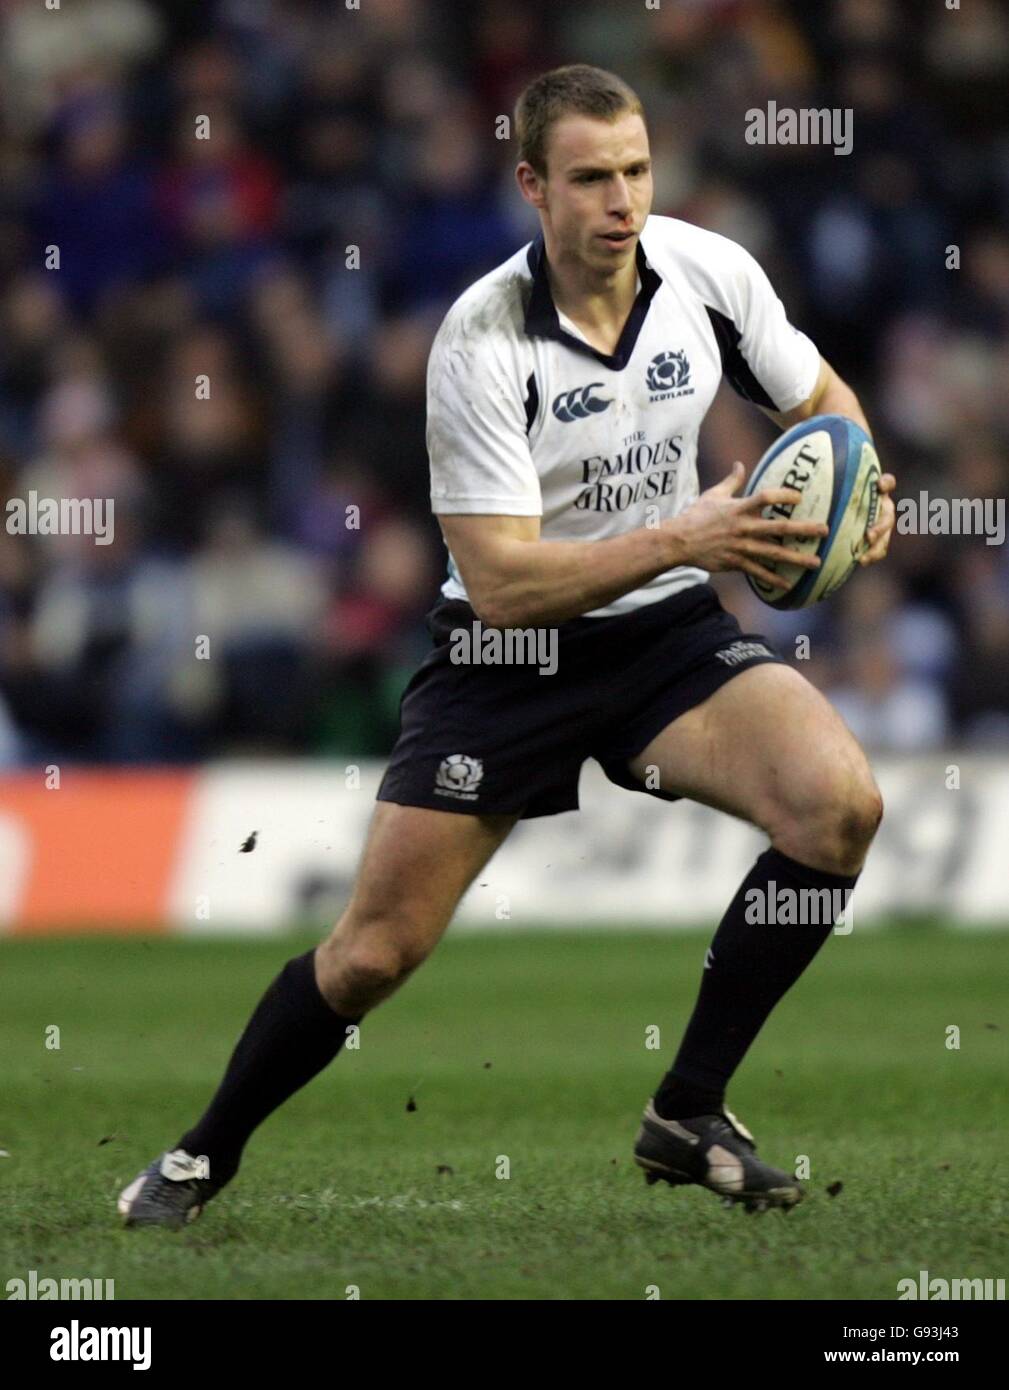 Scotland's Andrew Henderson during the RBS 6 Nations match against France at Murrayfield Stadium, Edinburgh, Sunday February 5, 2006. PRESS ASSOCIATION Photo. Photo credit should read: David Davies/PA. Stock Photo